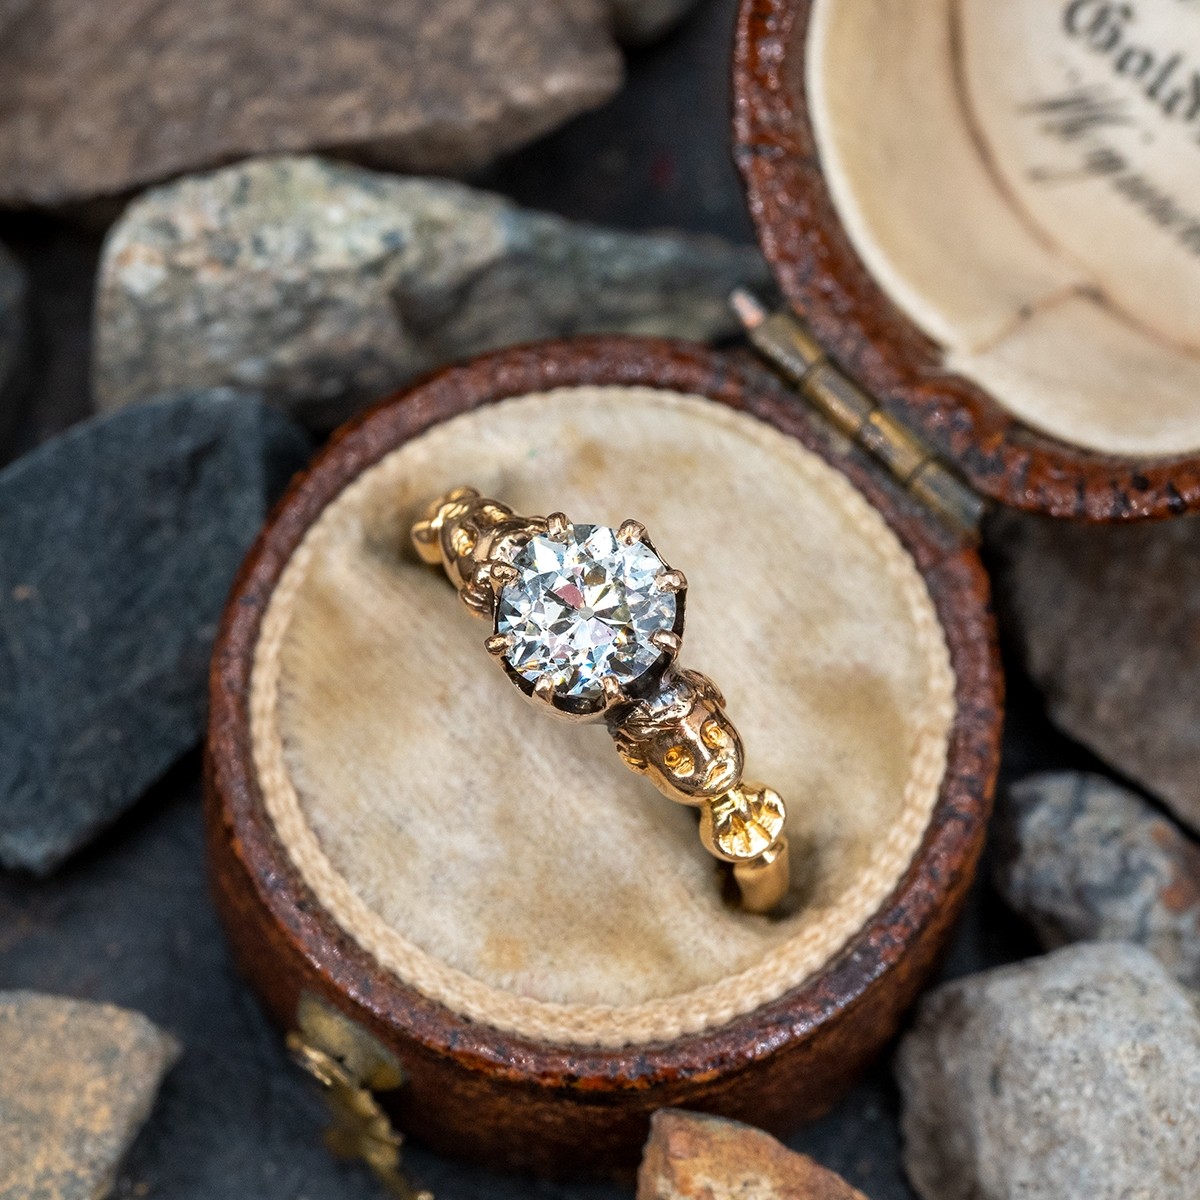 Utterly Beautiful Engagement Rings You'll Want To Own : Art Nouveau Era  Blends Victorian Era